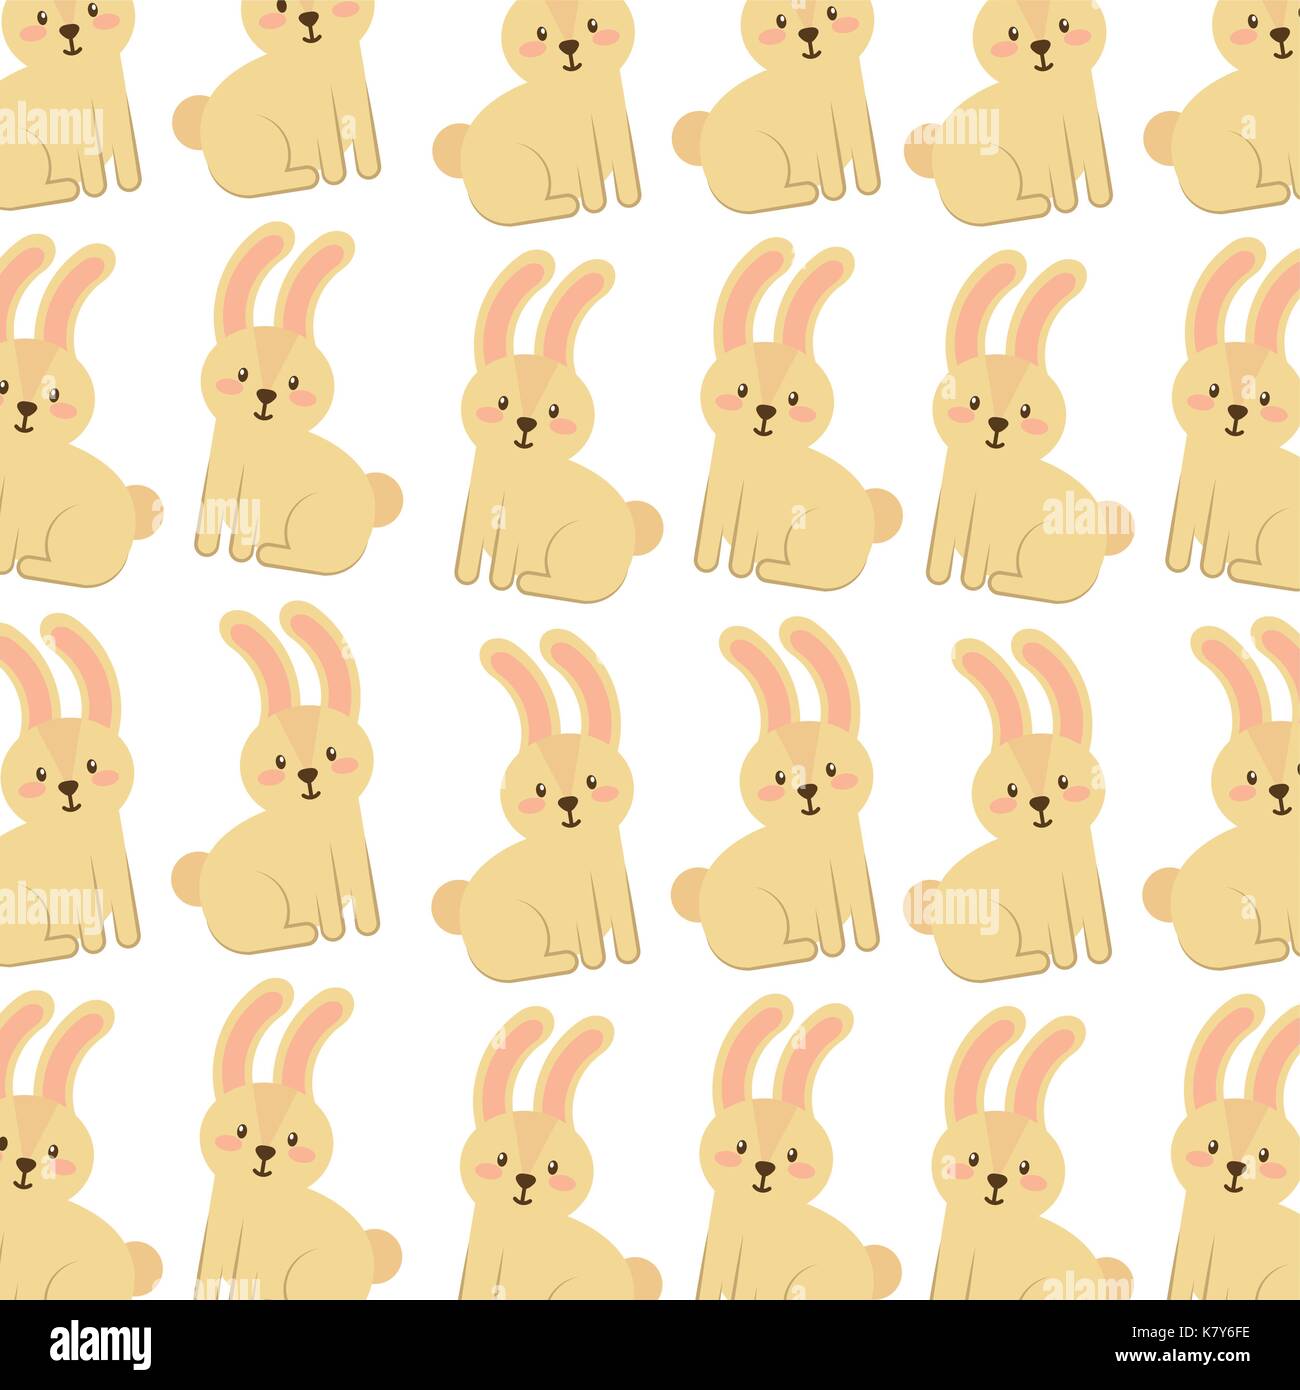 cute forest rabbit animal seamless pattern image Stock Vector Image ...